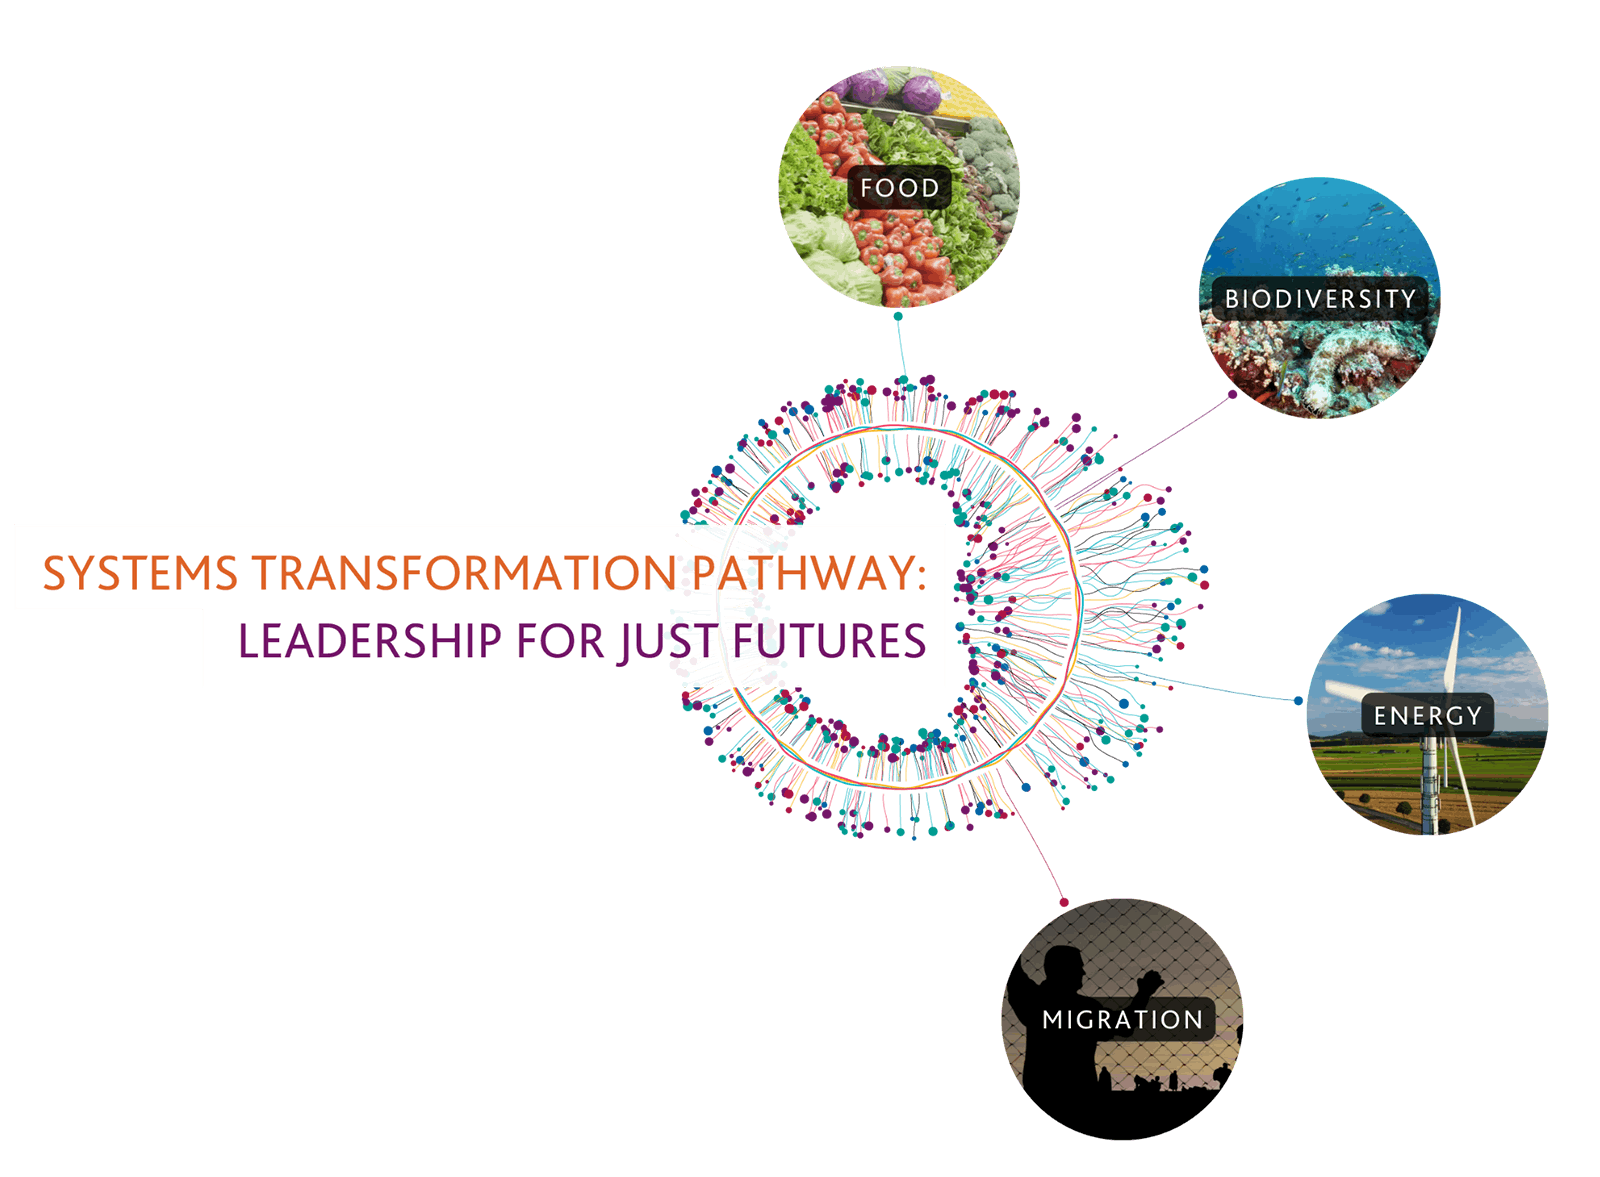 systems transformation pathway - food, biodiversity, energy, migration